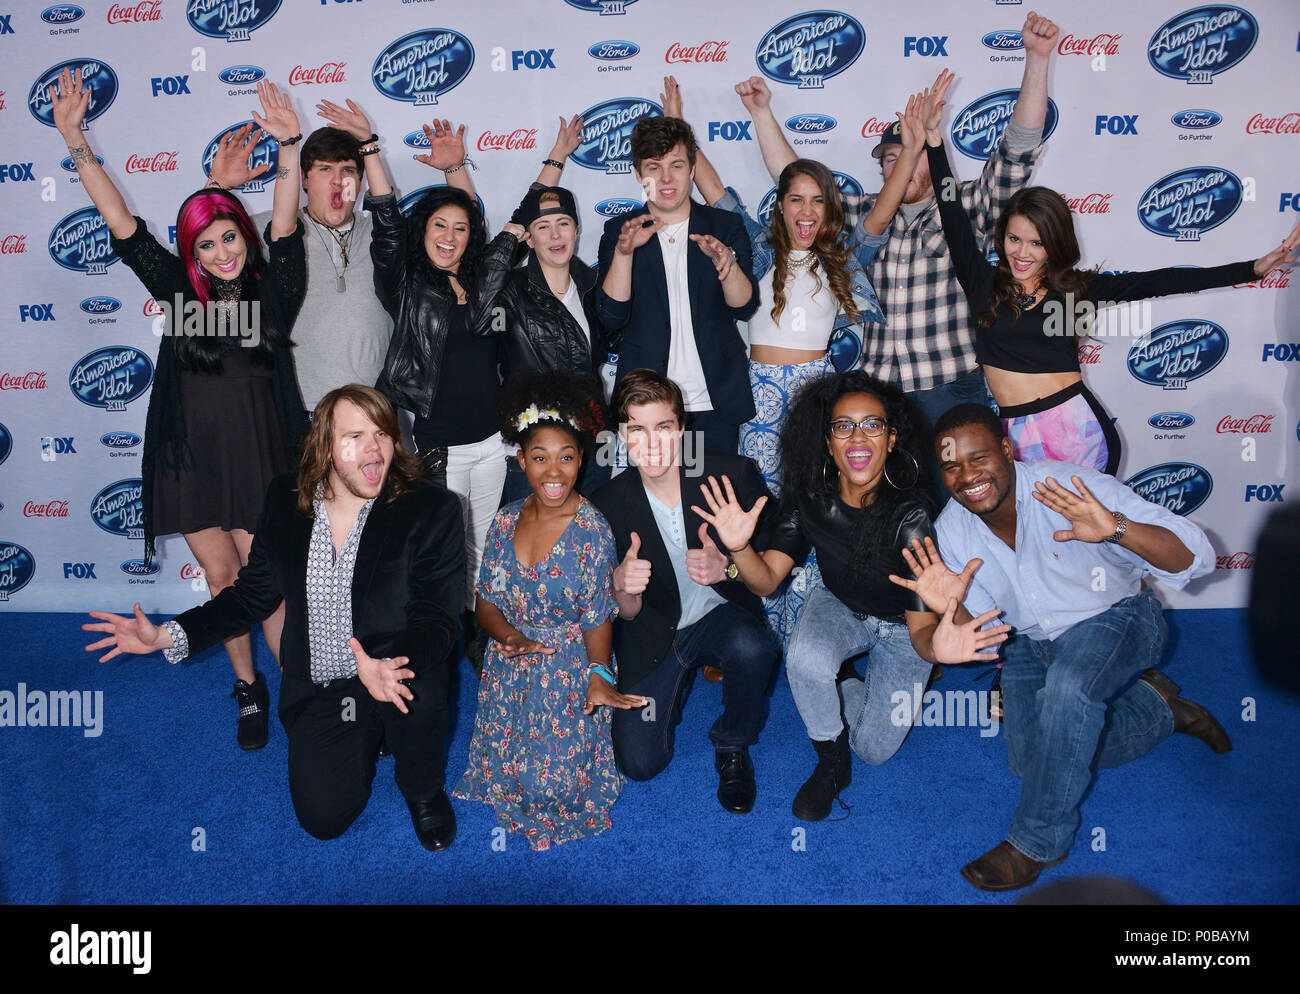 ZD8 8480 at the American Idol X!!! Finalists Party-2014 at the Fig & Olive Restaurant in Los Angeles. Finalists Jessica Meuse, Dexter Roberts, Jena Irene, MK Nobilette, Alex Preston, Emily Piriz, Ben Briley, Kristen O'Connor (Bottom L-R) Caleb Johnson, Malaya Watson, Sam Woolf, Majesty Rose and C.J. Harris attends FOX's 'American Idol XIII' finalists party at Fig & Olive Melrose PlaceThirteen Finalists 317  Event in Hollywood Life - California, Red Carpet Event, USA, Film Industry, Celebrities, Photography, Bestof, Arts Culture and Entertainment, Topix Celebrities fashion, Best of, Hollywood L Stock Photo